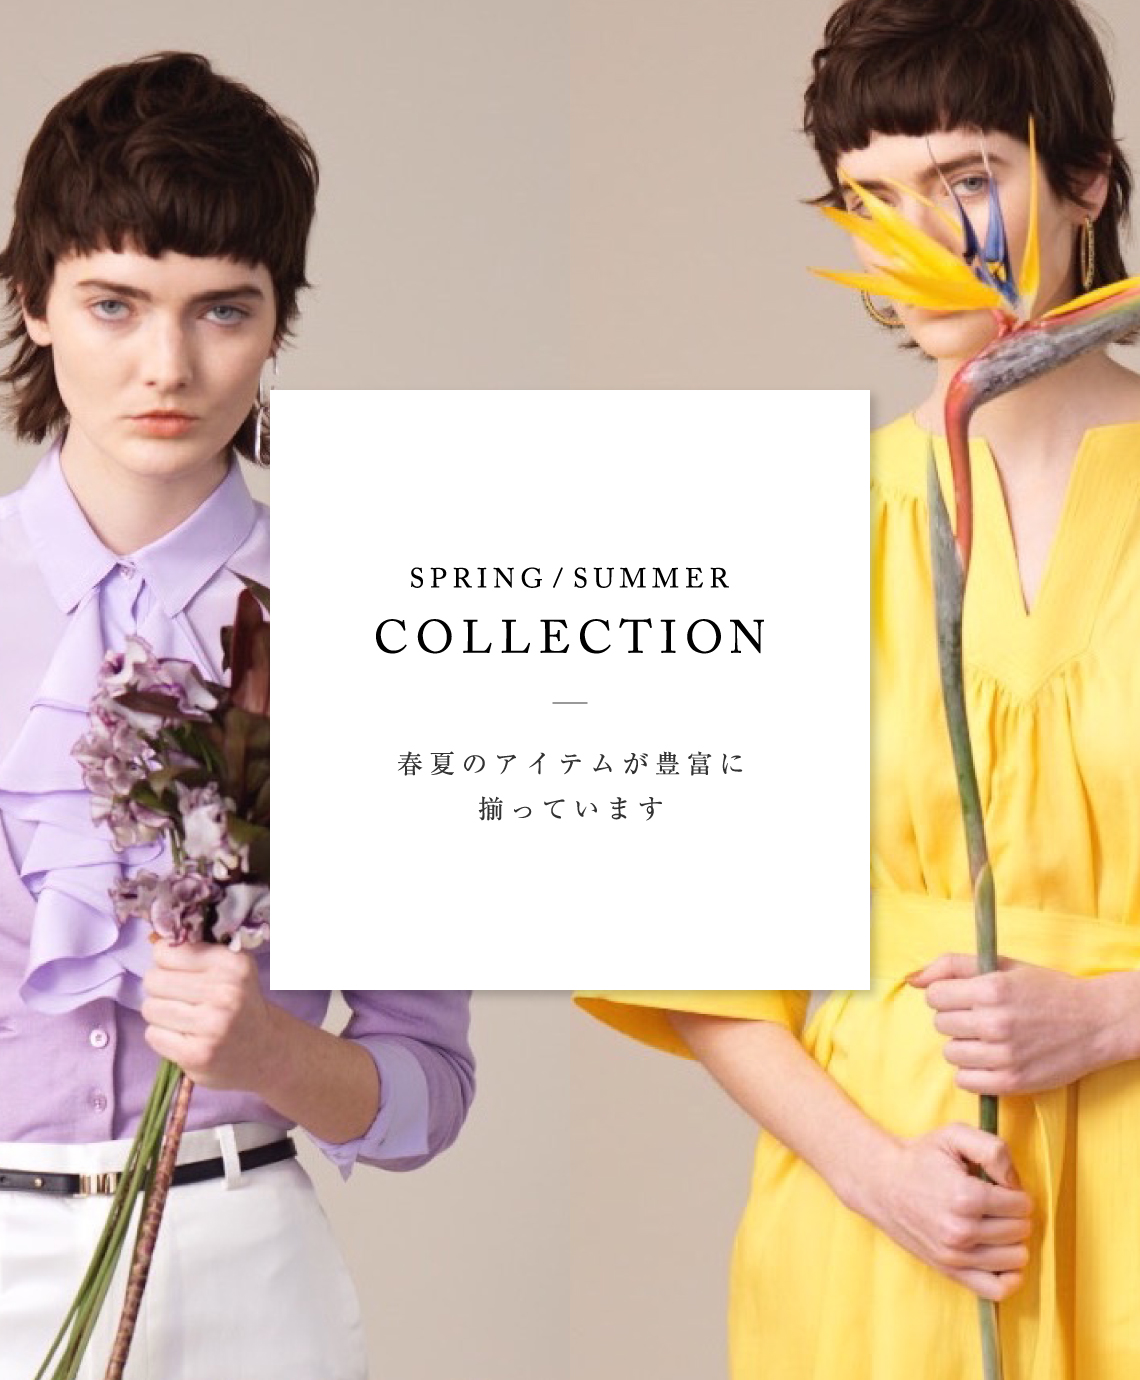 SPRING / SUMMER COLLECTION